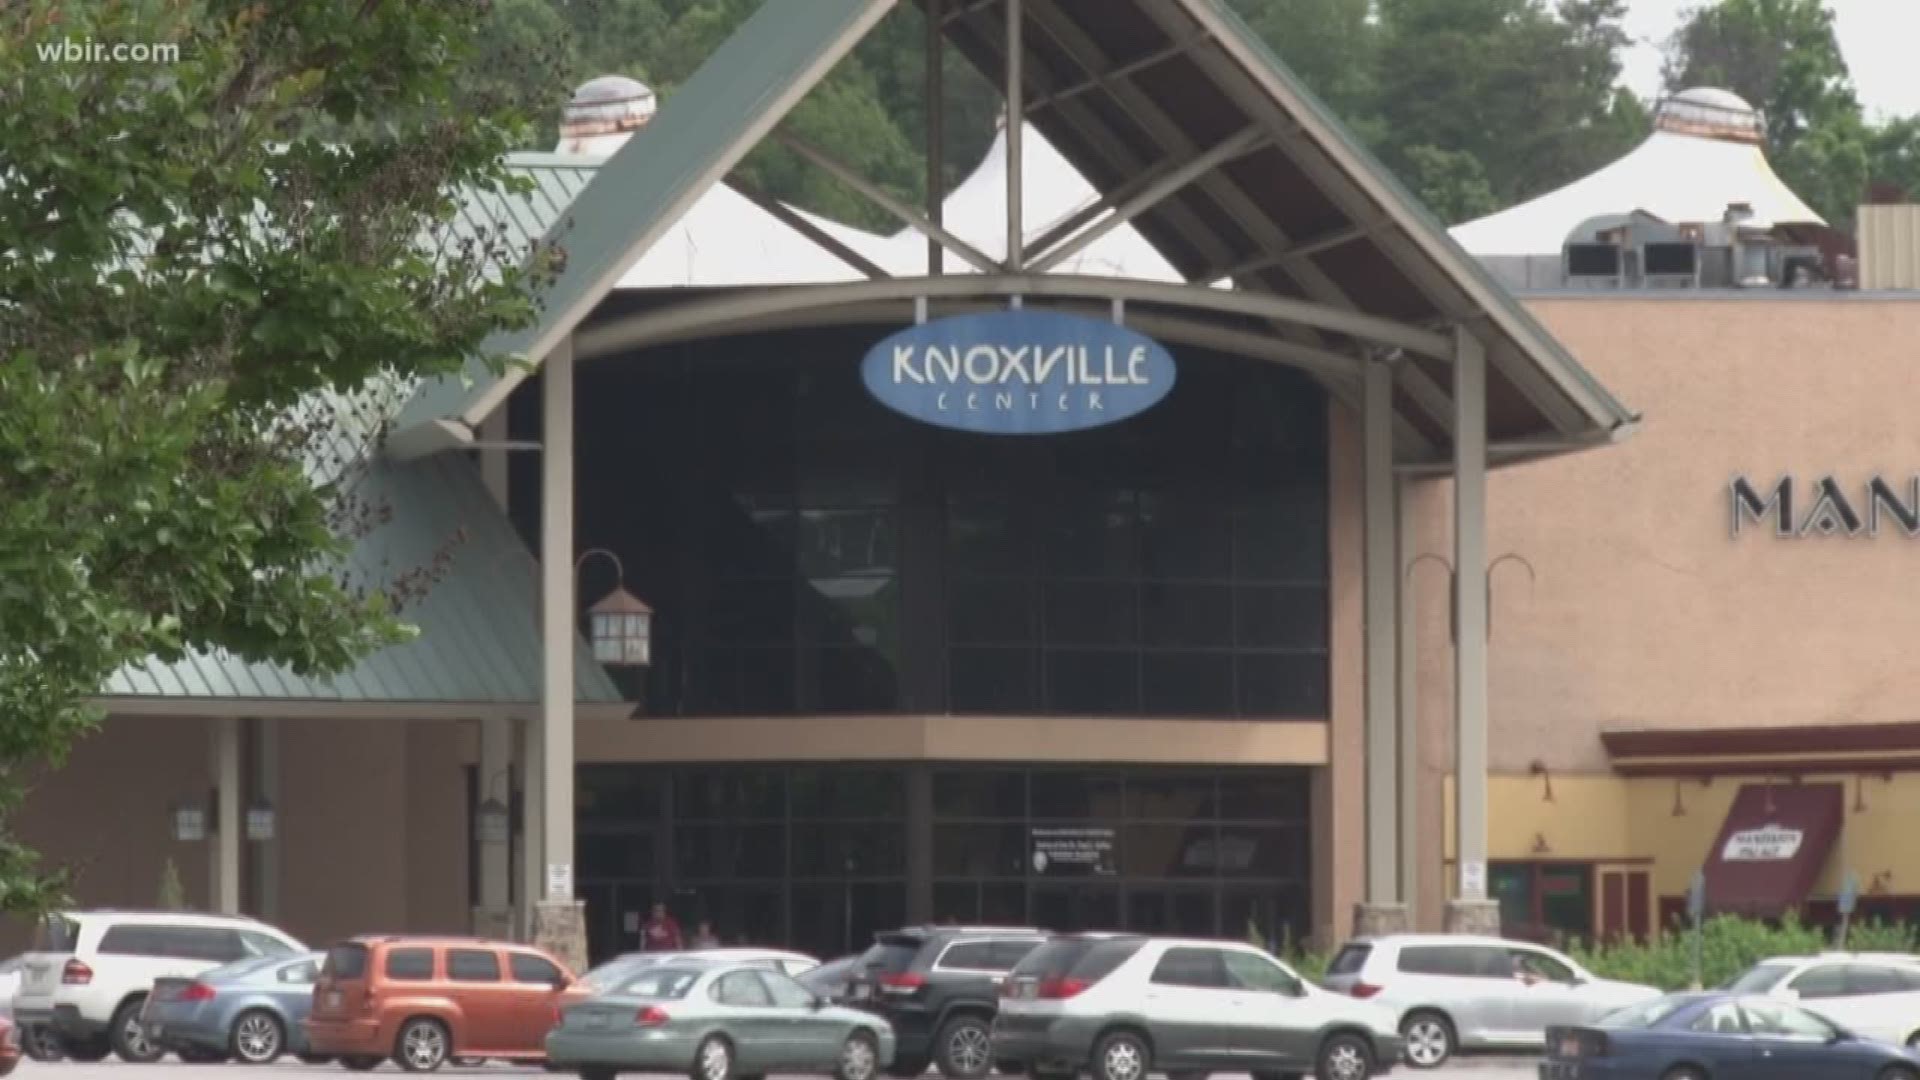 Knoxville city leaders say they see development opportunities despite a struggling Knoxville Center Mall.